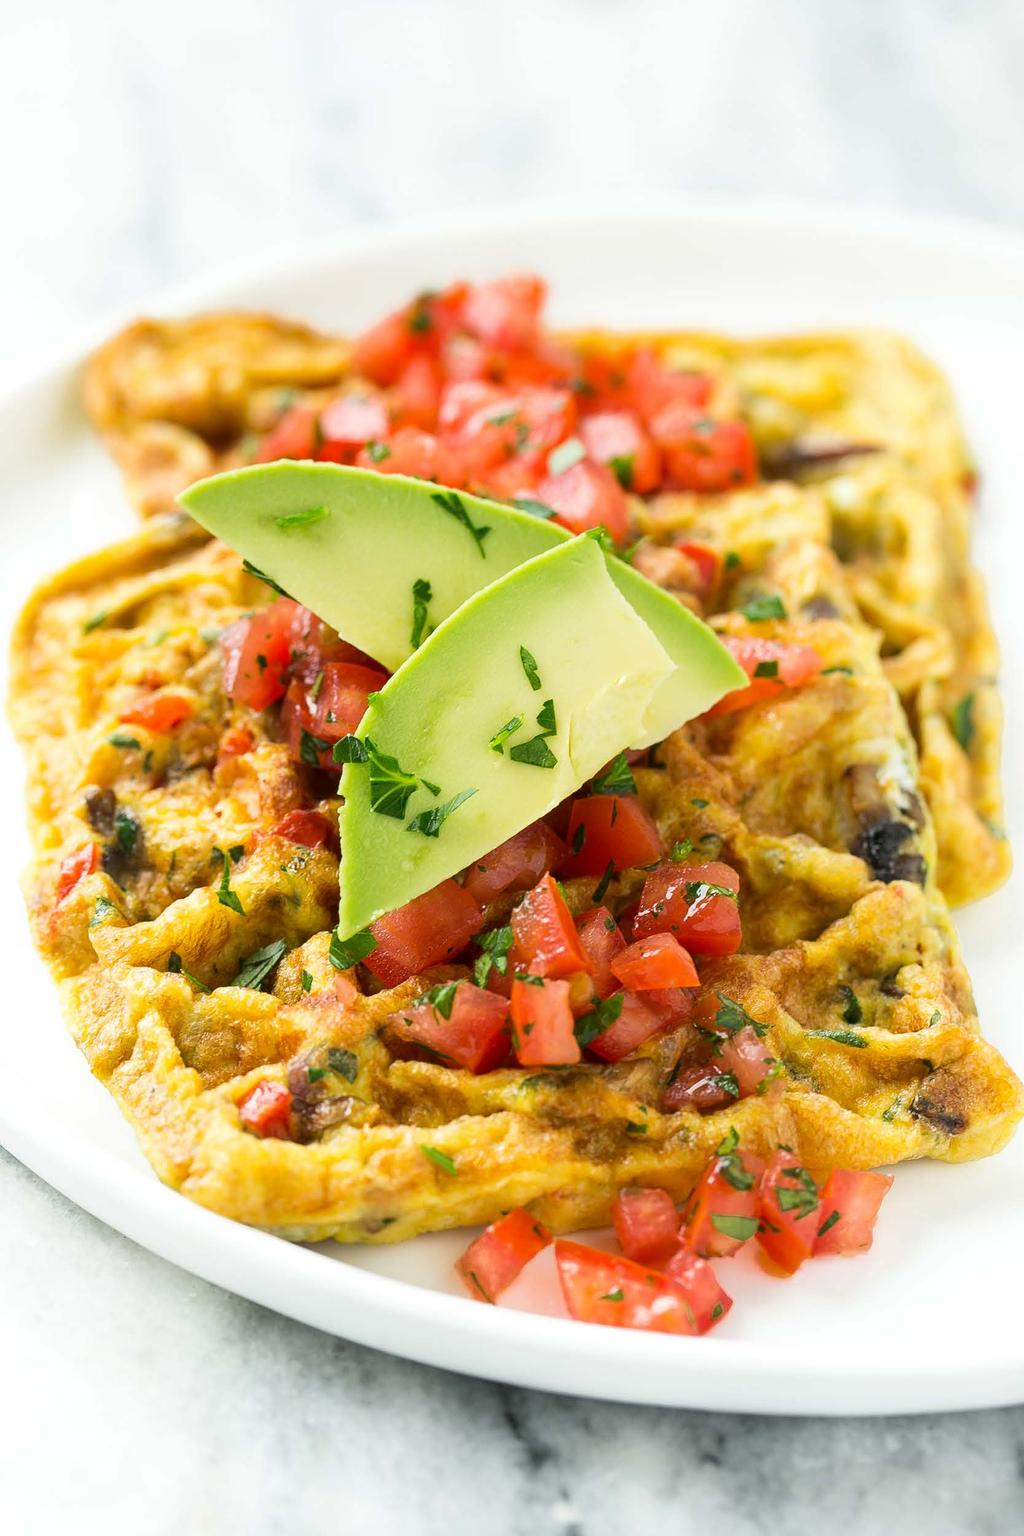 6. Omelet Waffles Eggs mixed with sauteed vegetables and cooked in a waffle maker. Top your omelet waffles with diced tomatoes, herbs and avocado for a satisfying breakfast.